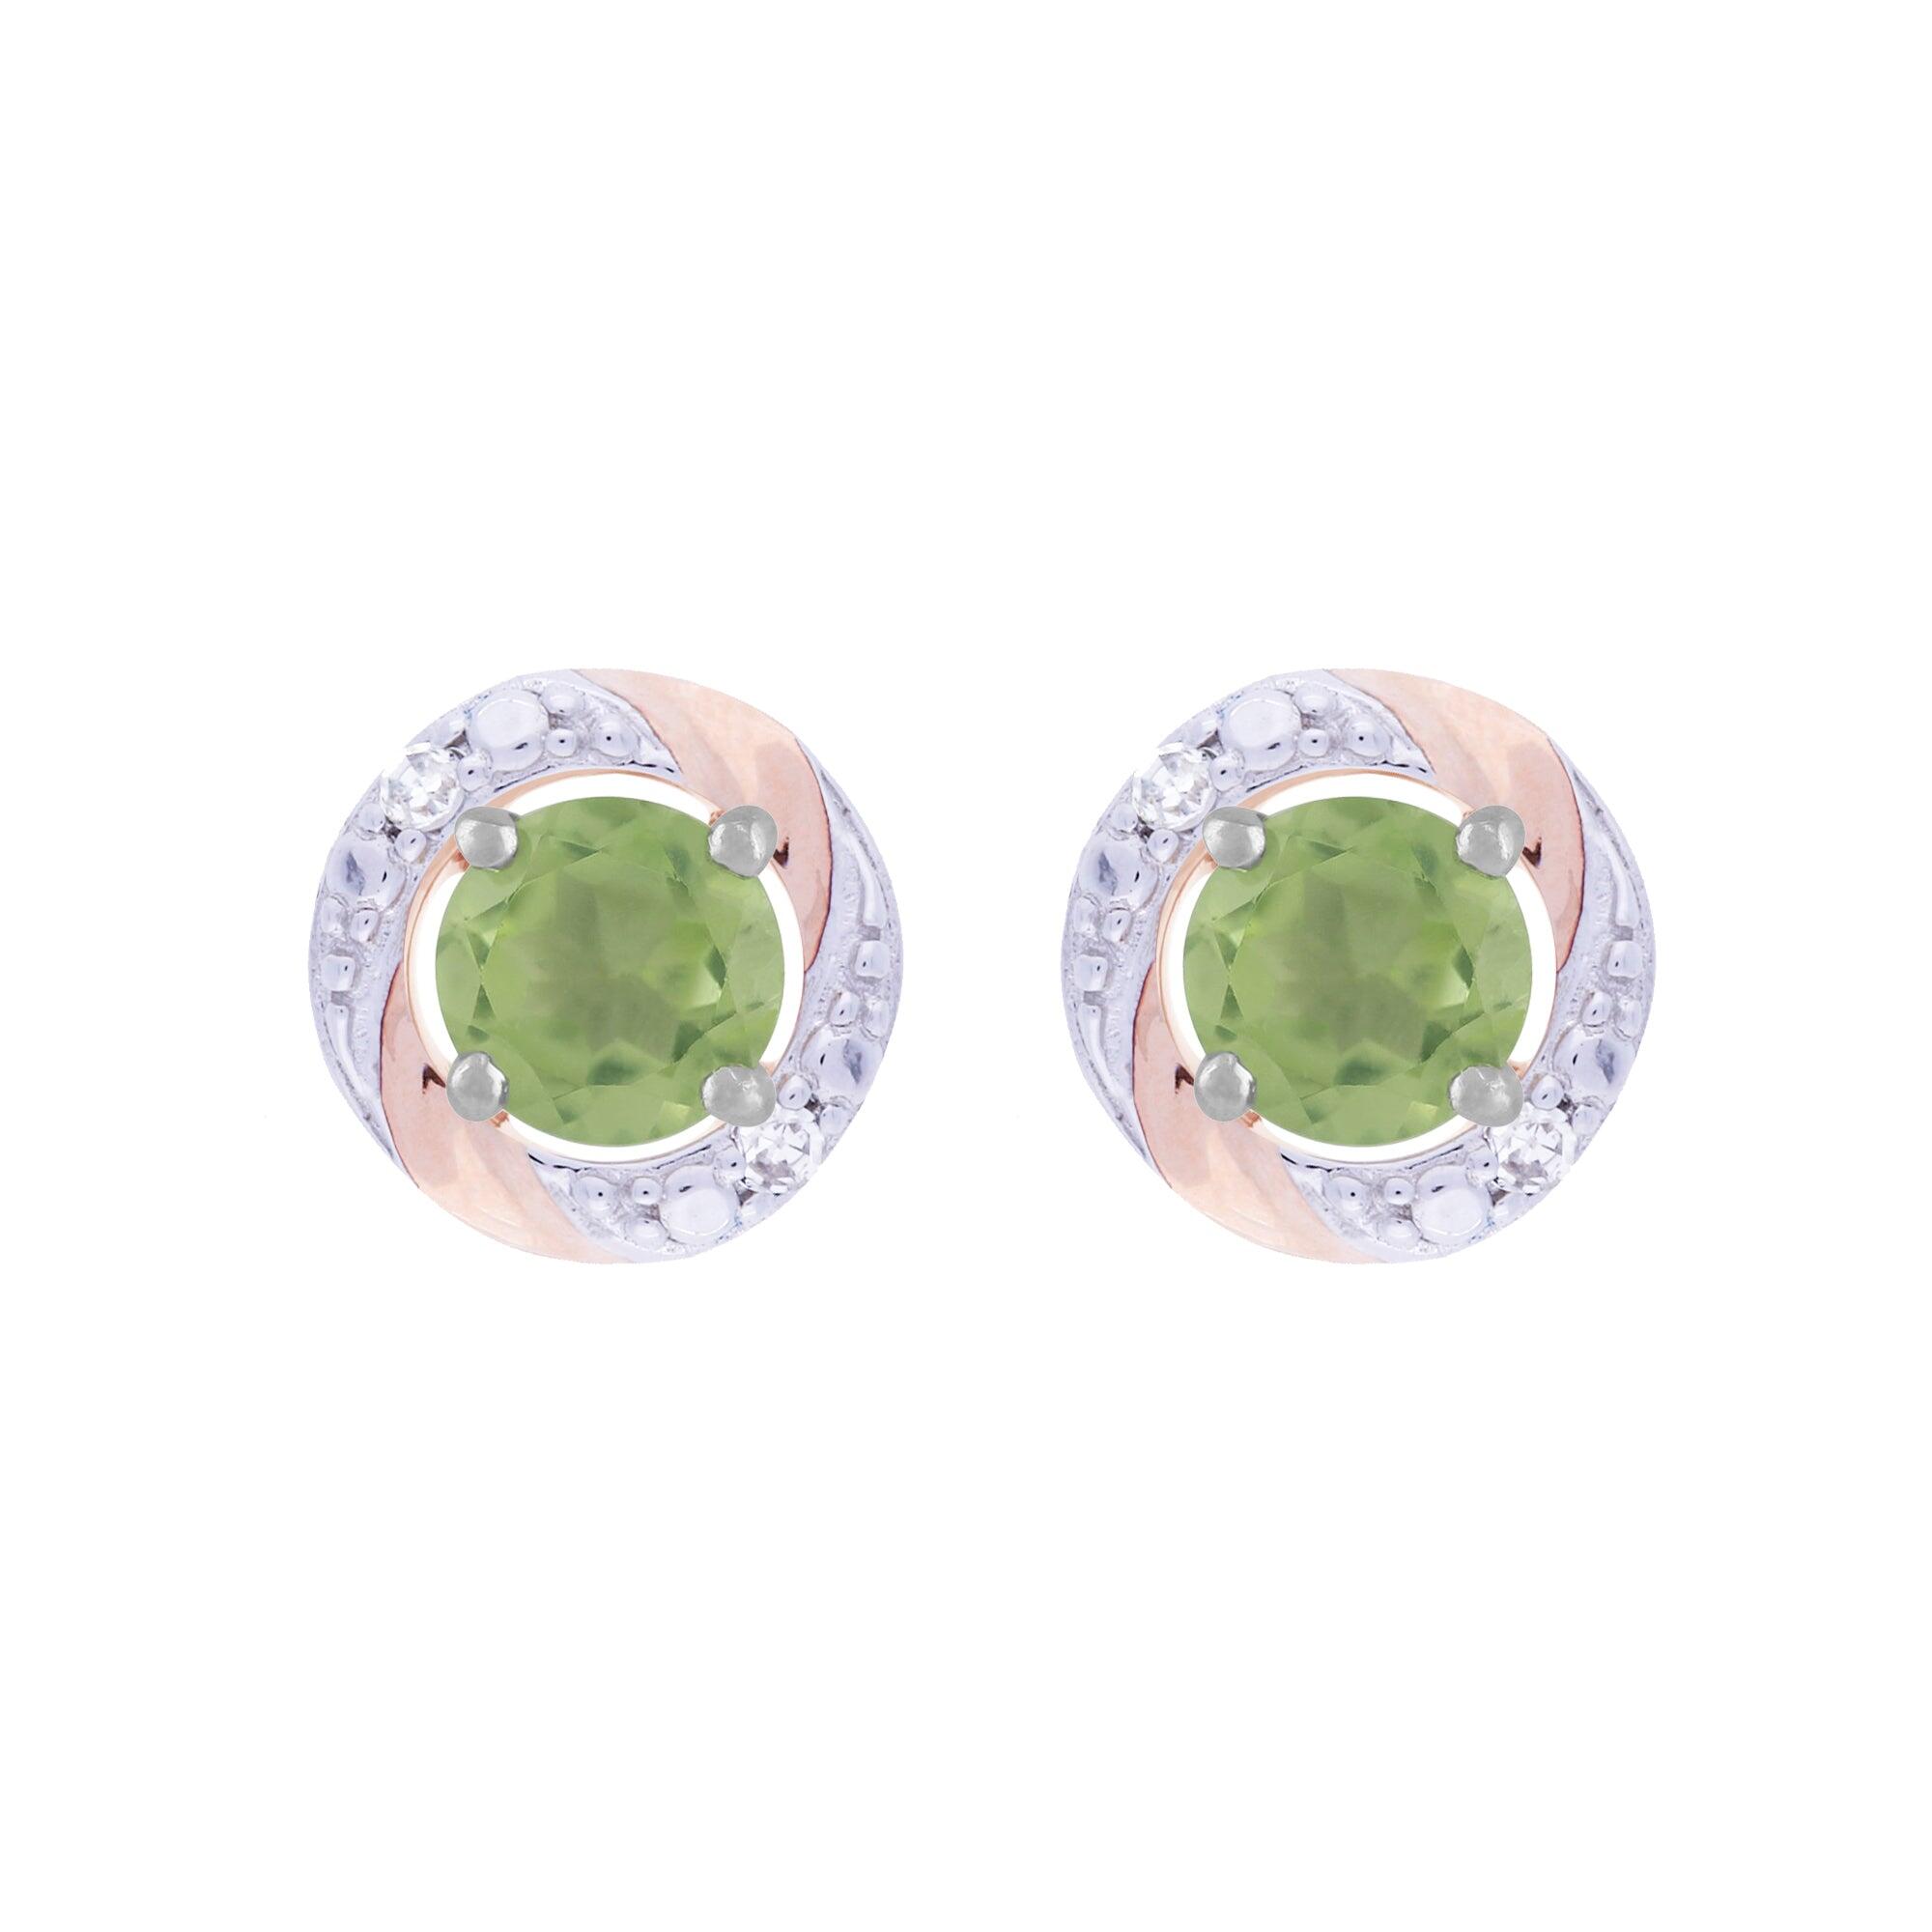 Classic Round Peridot Stud Earrings with Detachable Diamond Round Earrings Jacket Set in 9ct White Gold